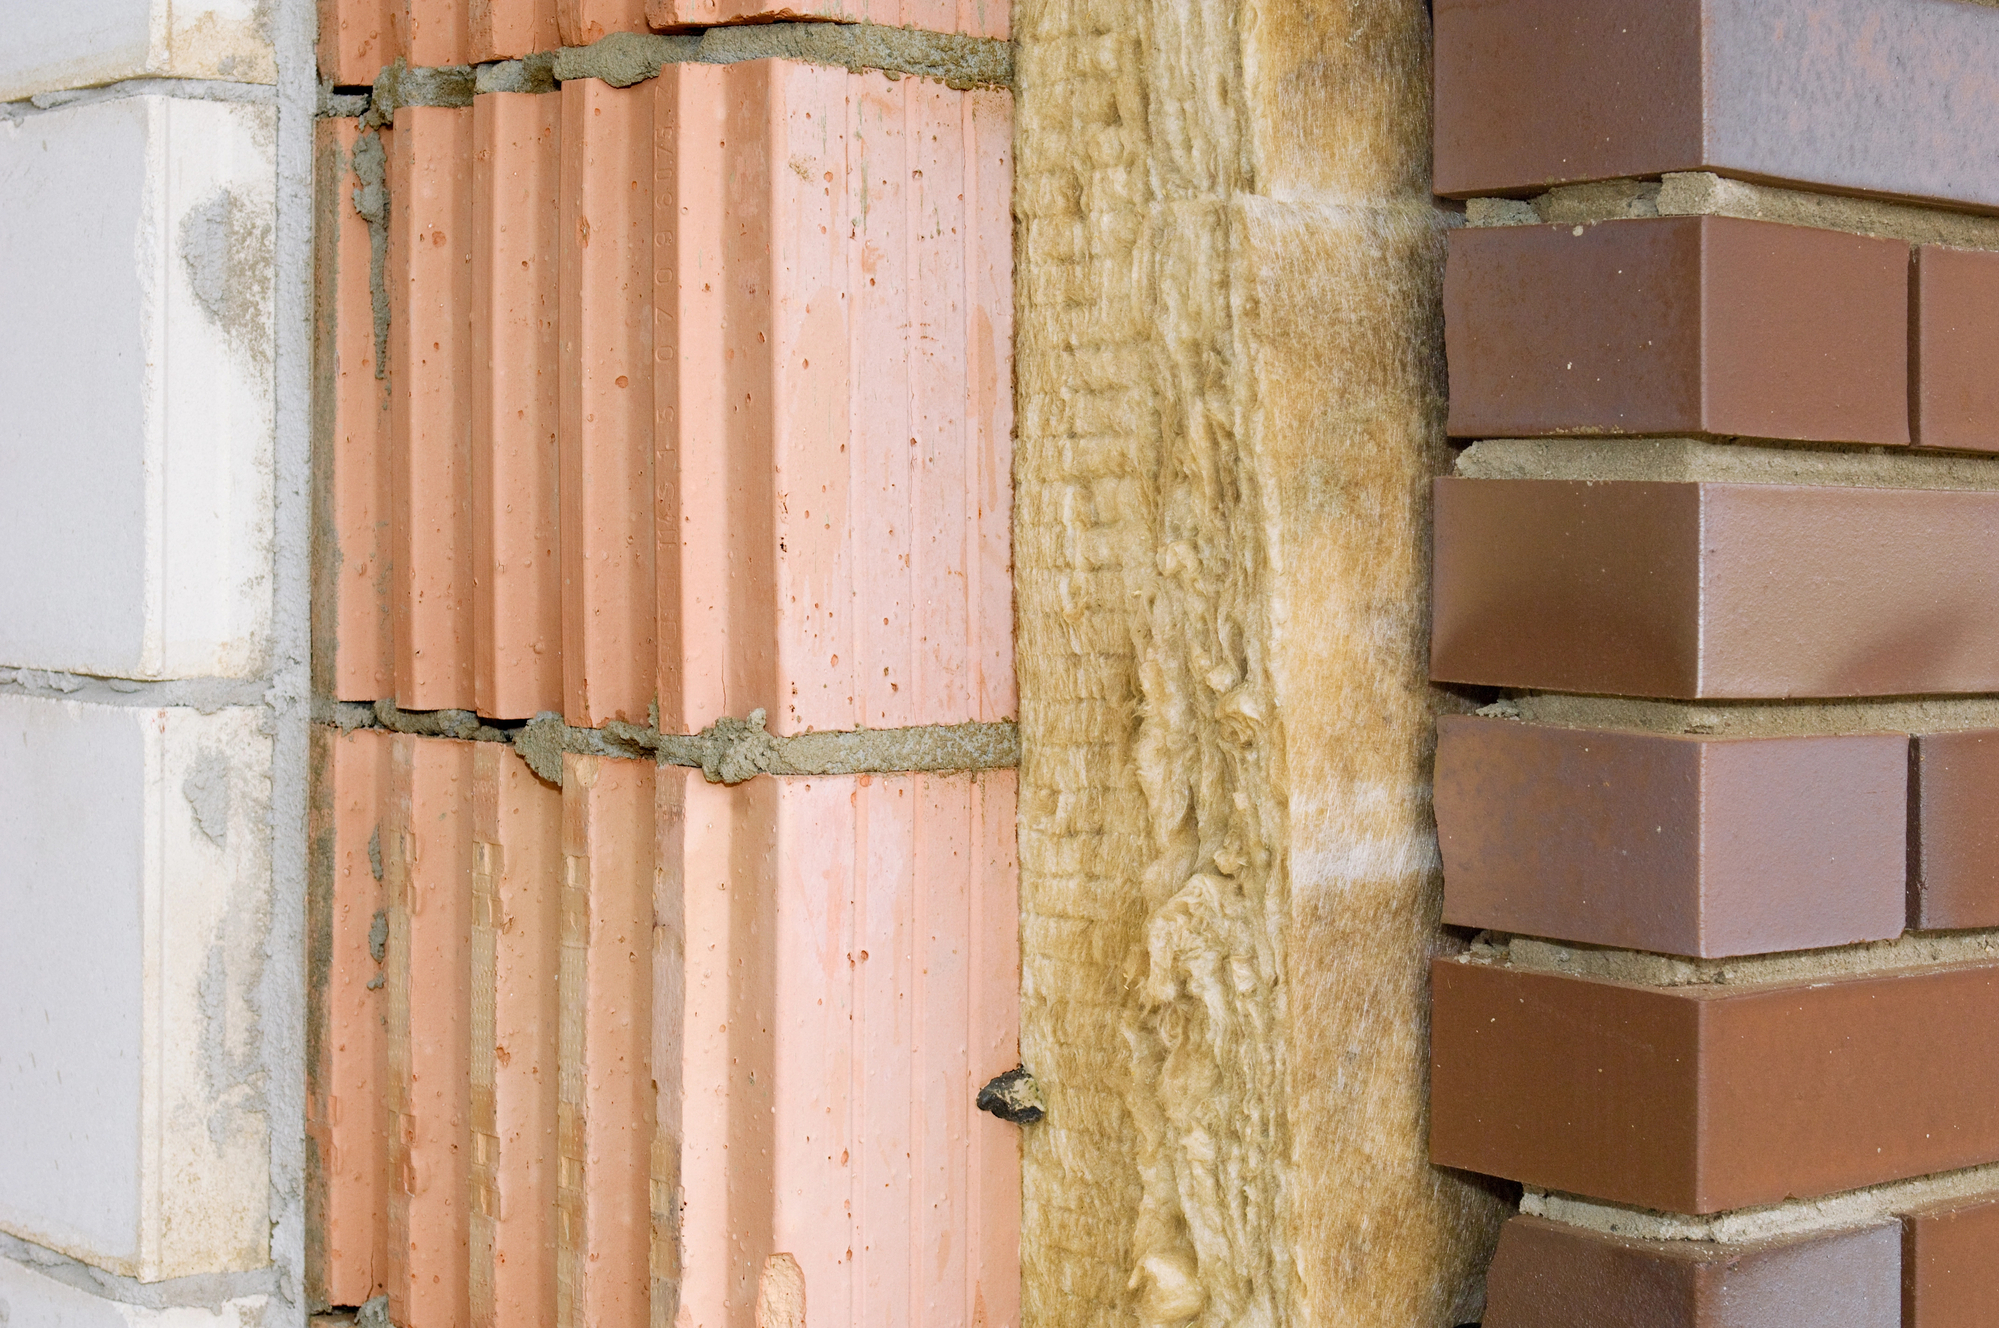 Insulation materials for building thermal insulation-Vertical wall layout with insulation